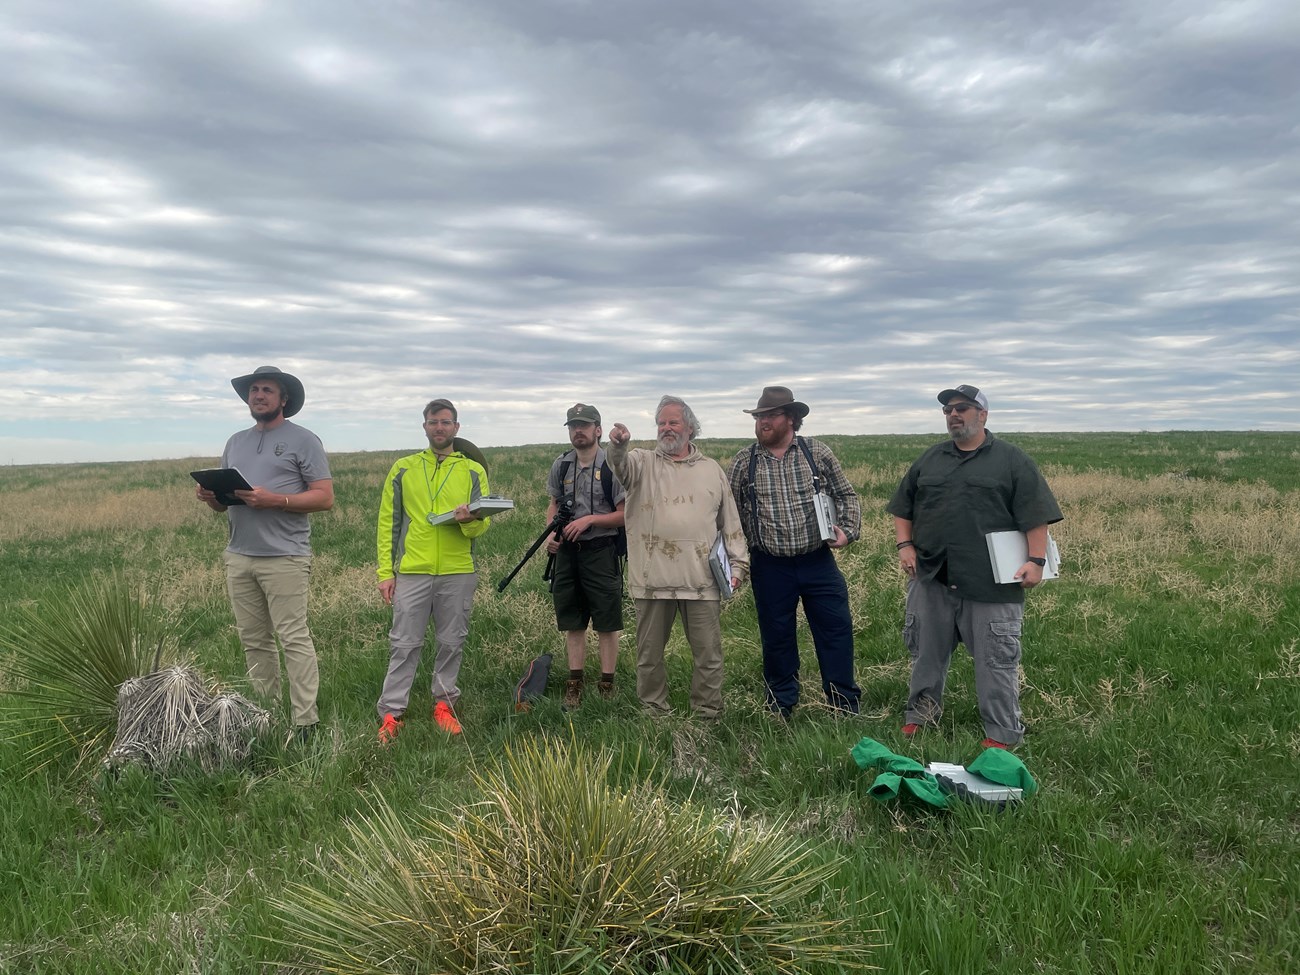 Five people standing in a field carrying surveying equipment and notebooks. One is pointing off into the distance.